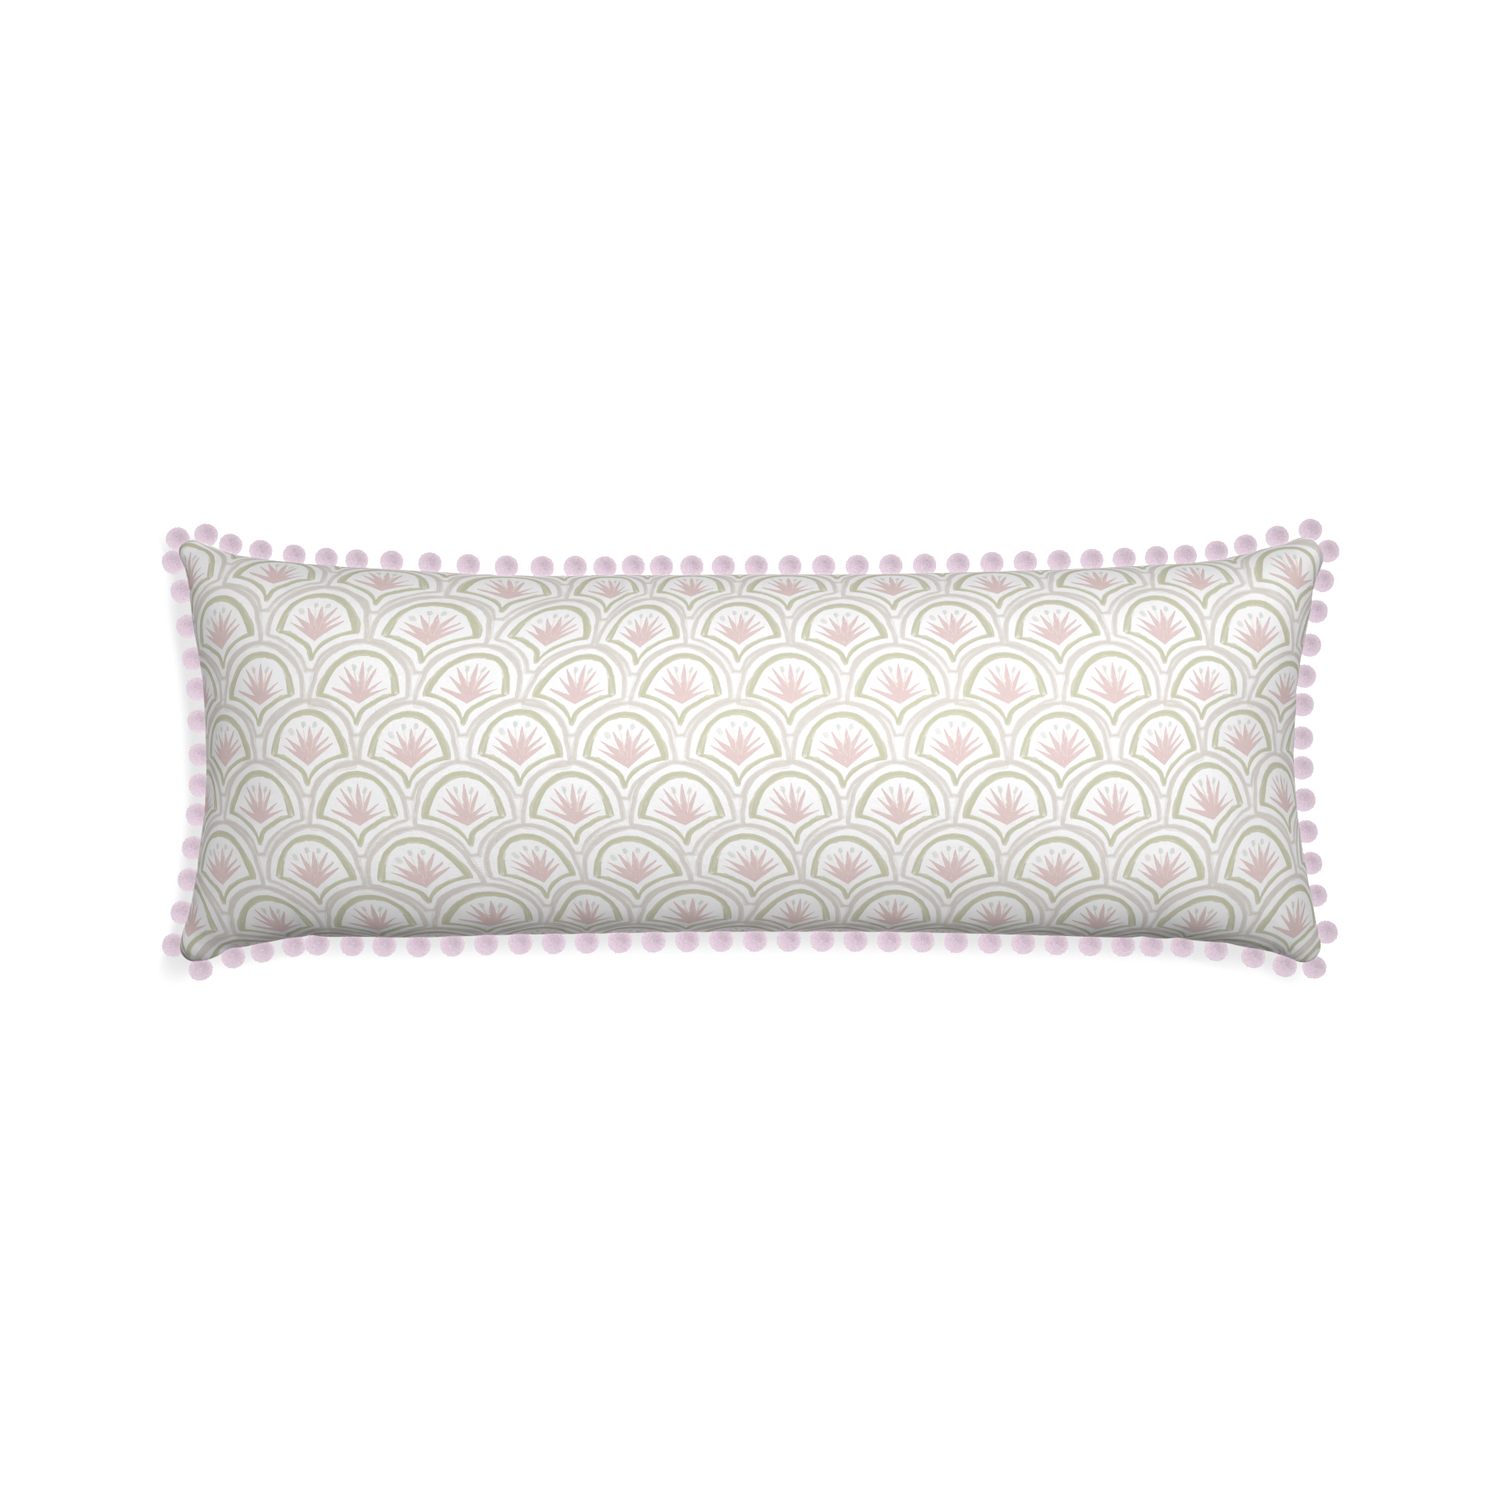 Xl-lumbar thatcher rose custom pillow with l on white background